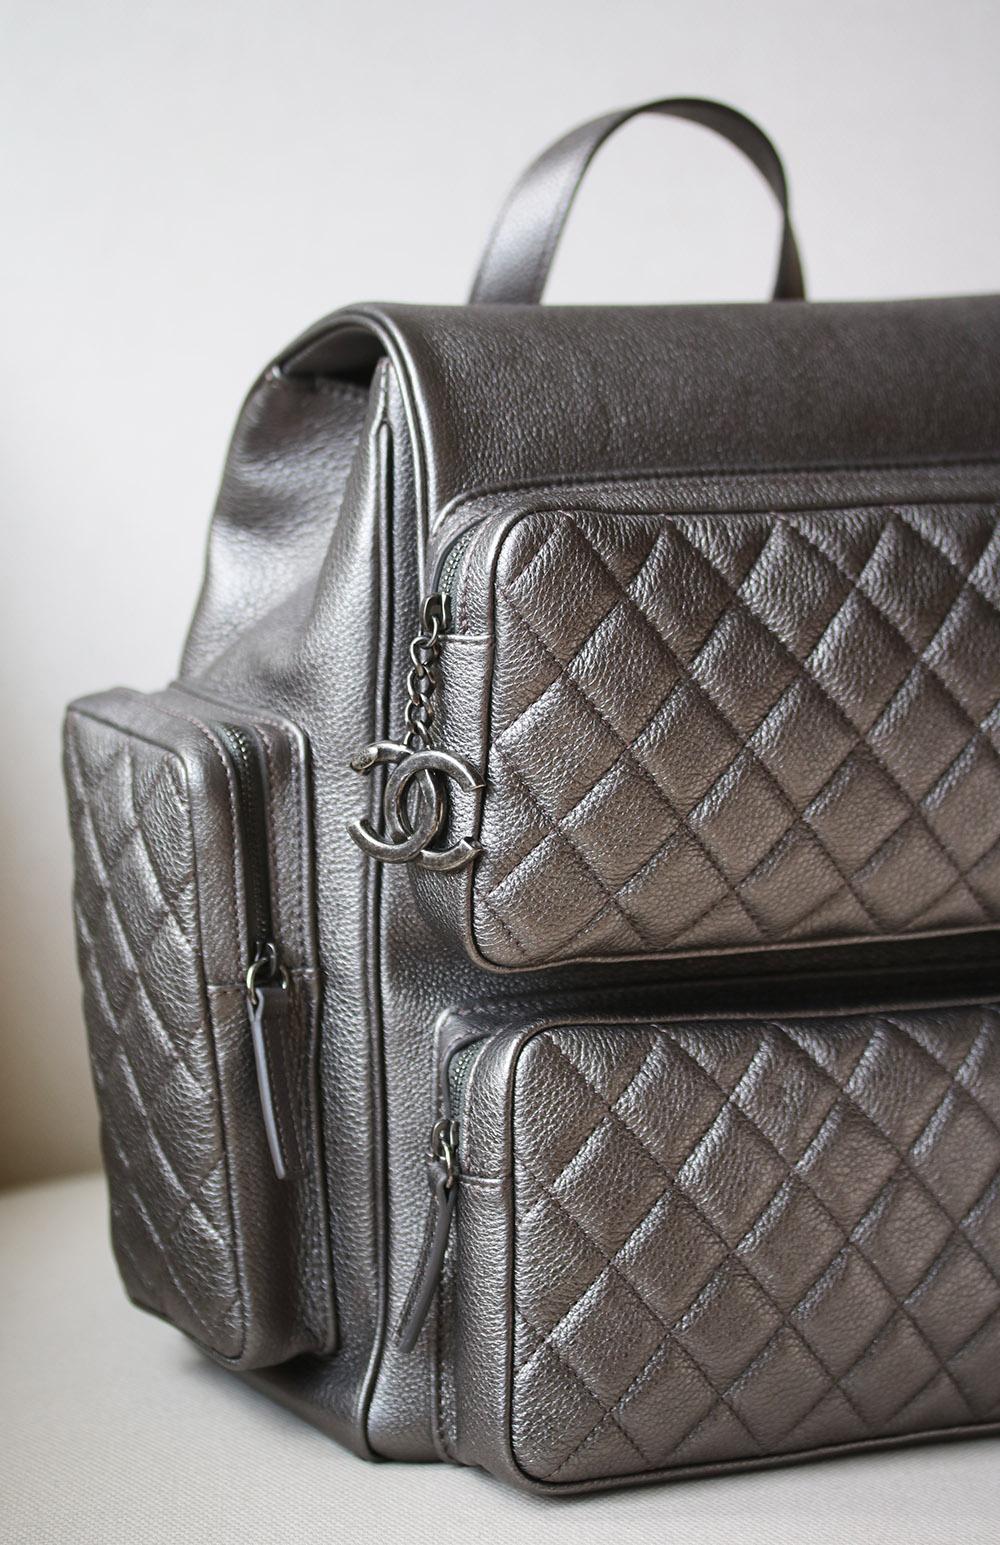 Chanel metallic Casual Rock grained calfskin quilted large backpack in charcoal. This stylish backpack is crafted of glazed calfskin leather in a metallic dark charcoal silver. This squared bag features structured diamond quilted front external